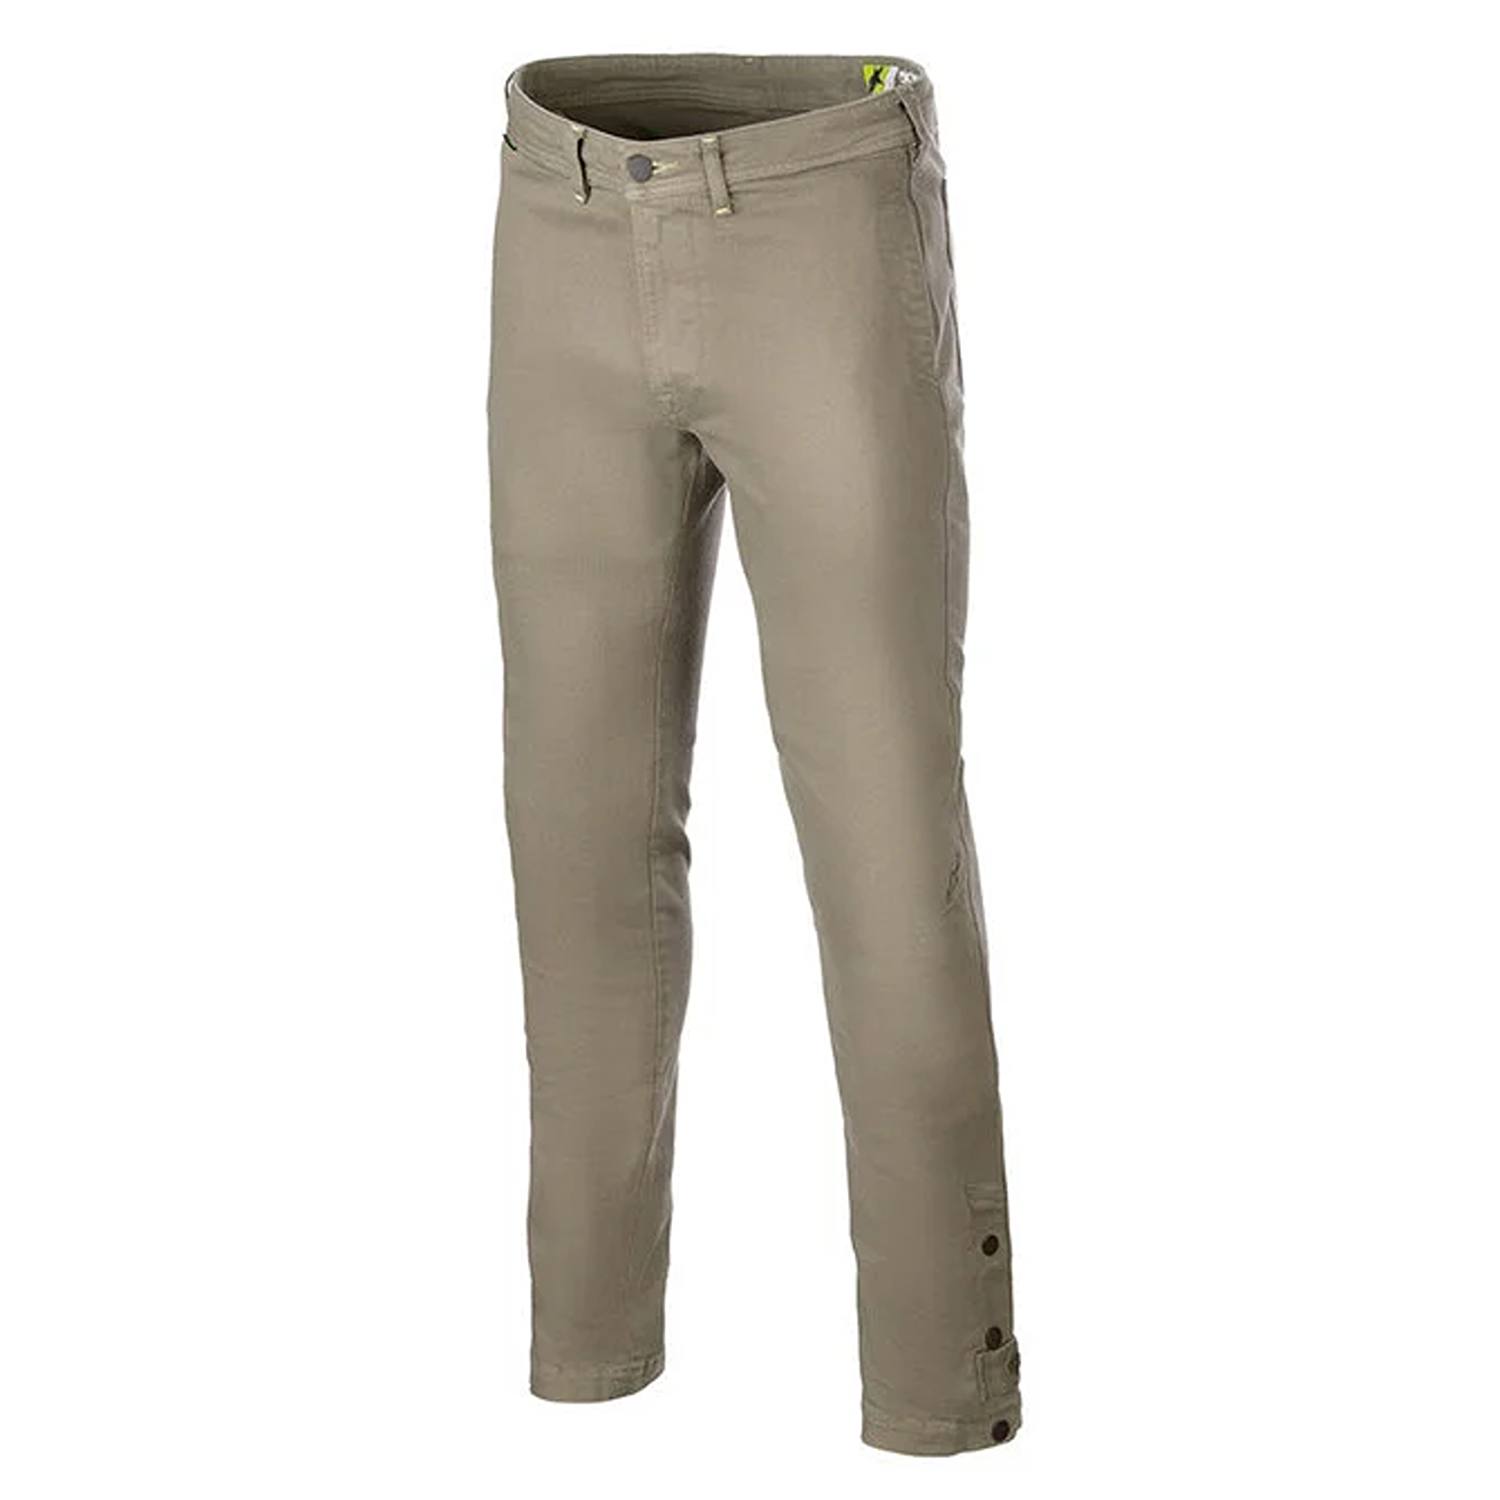 Image of Alpinestars Stratos Regular Fit Tech Riding Pants Military Green Taille 31